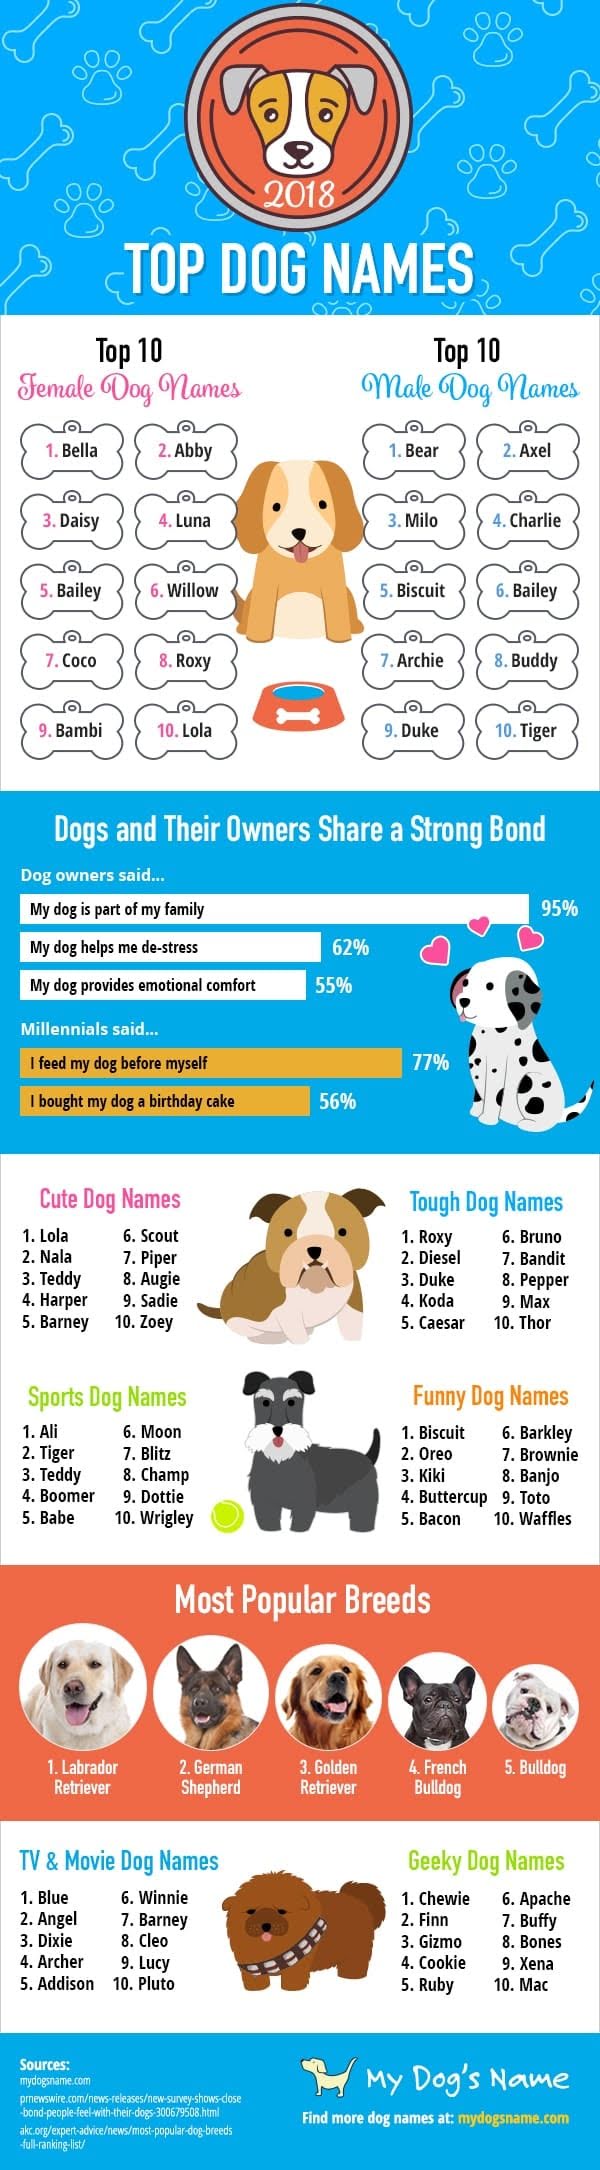 Top Dog Names of 2019 #infographic